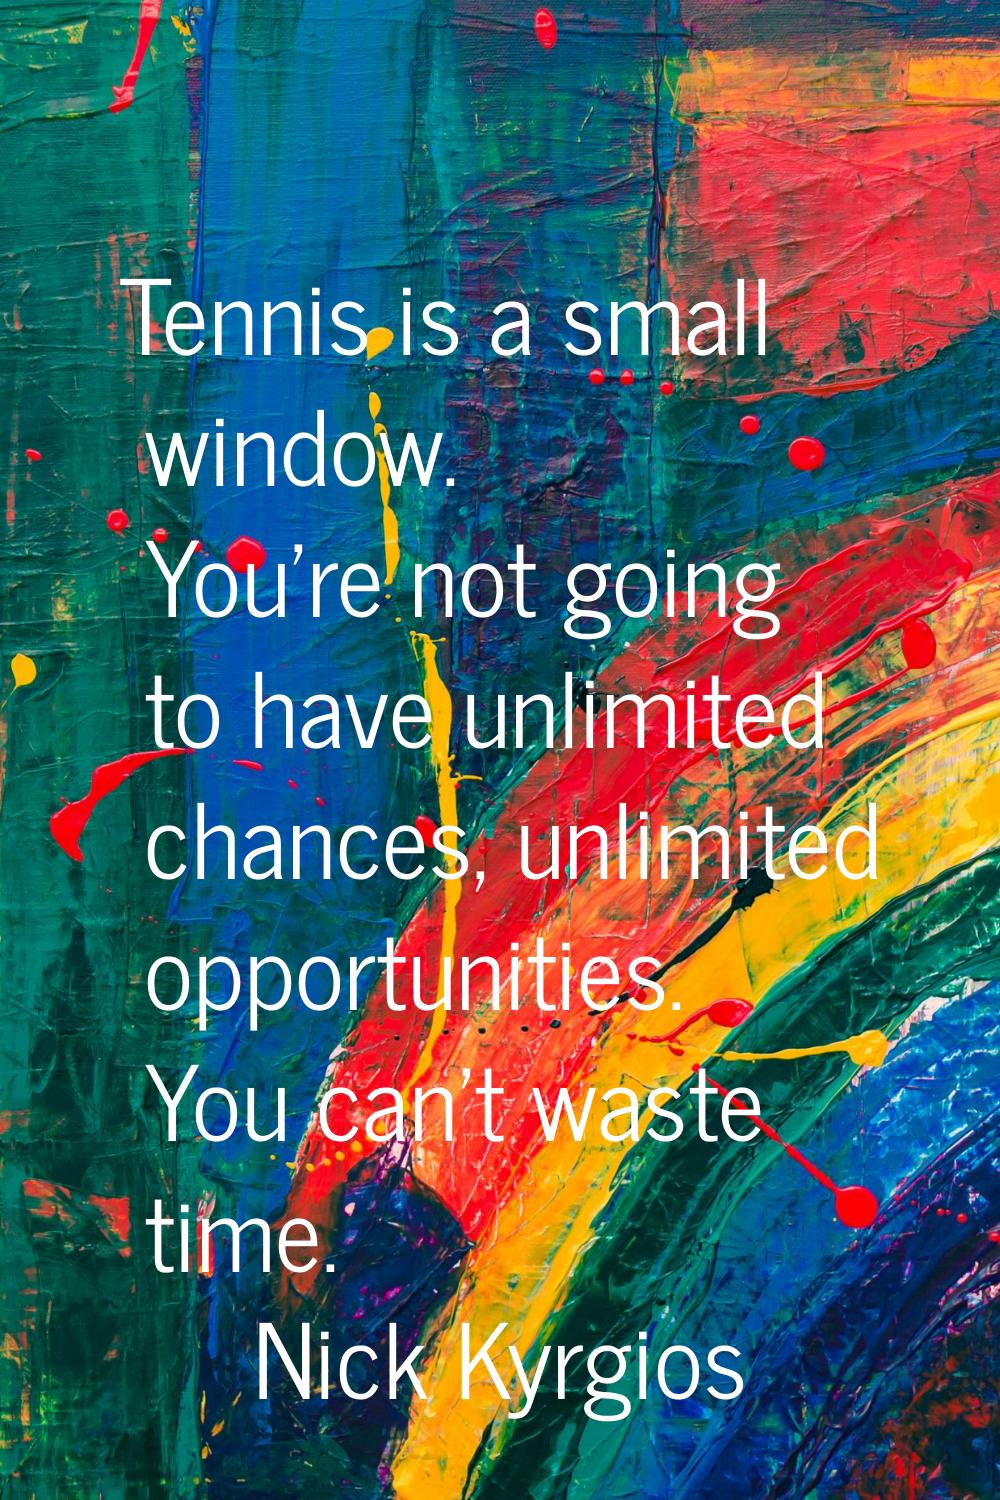 Tennis is a small window. You're not going to have unlimited chances, unlimited opportunities. You 